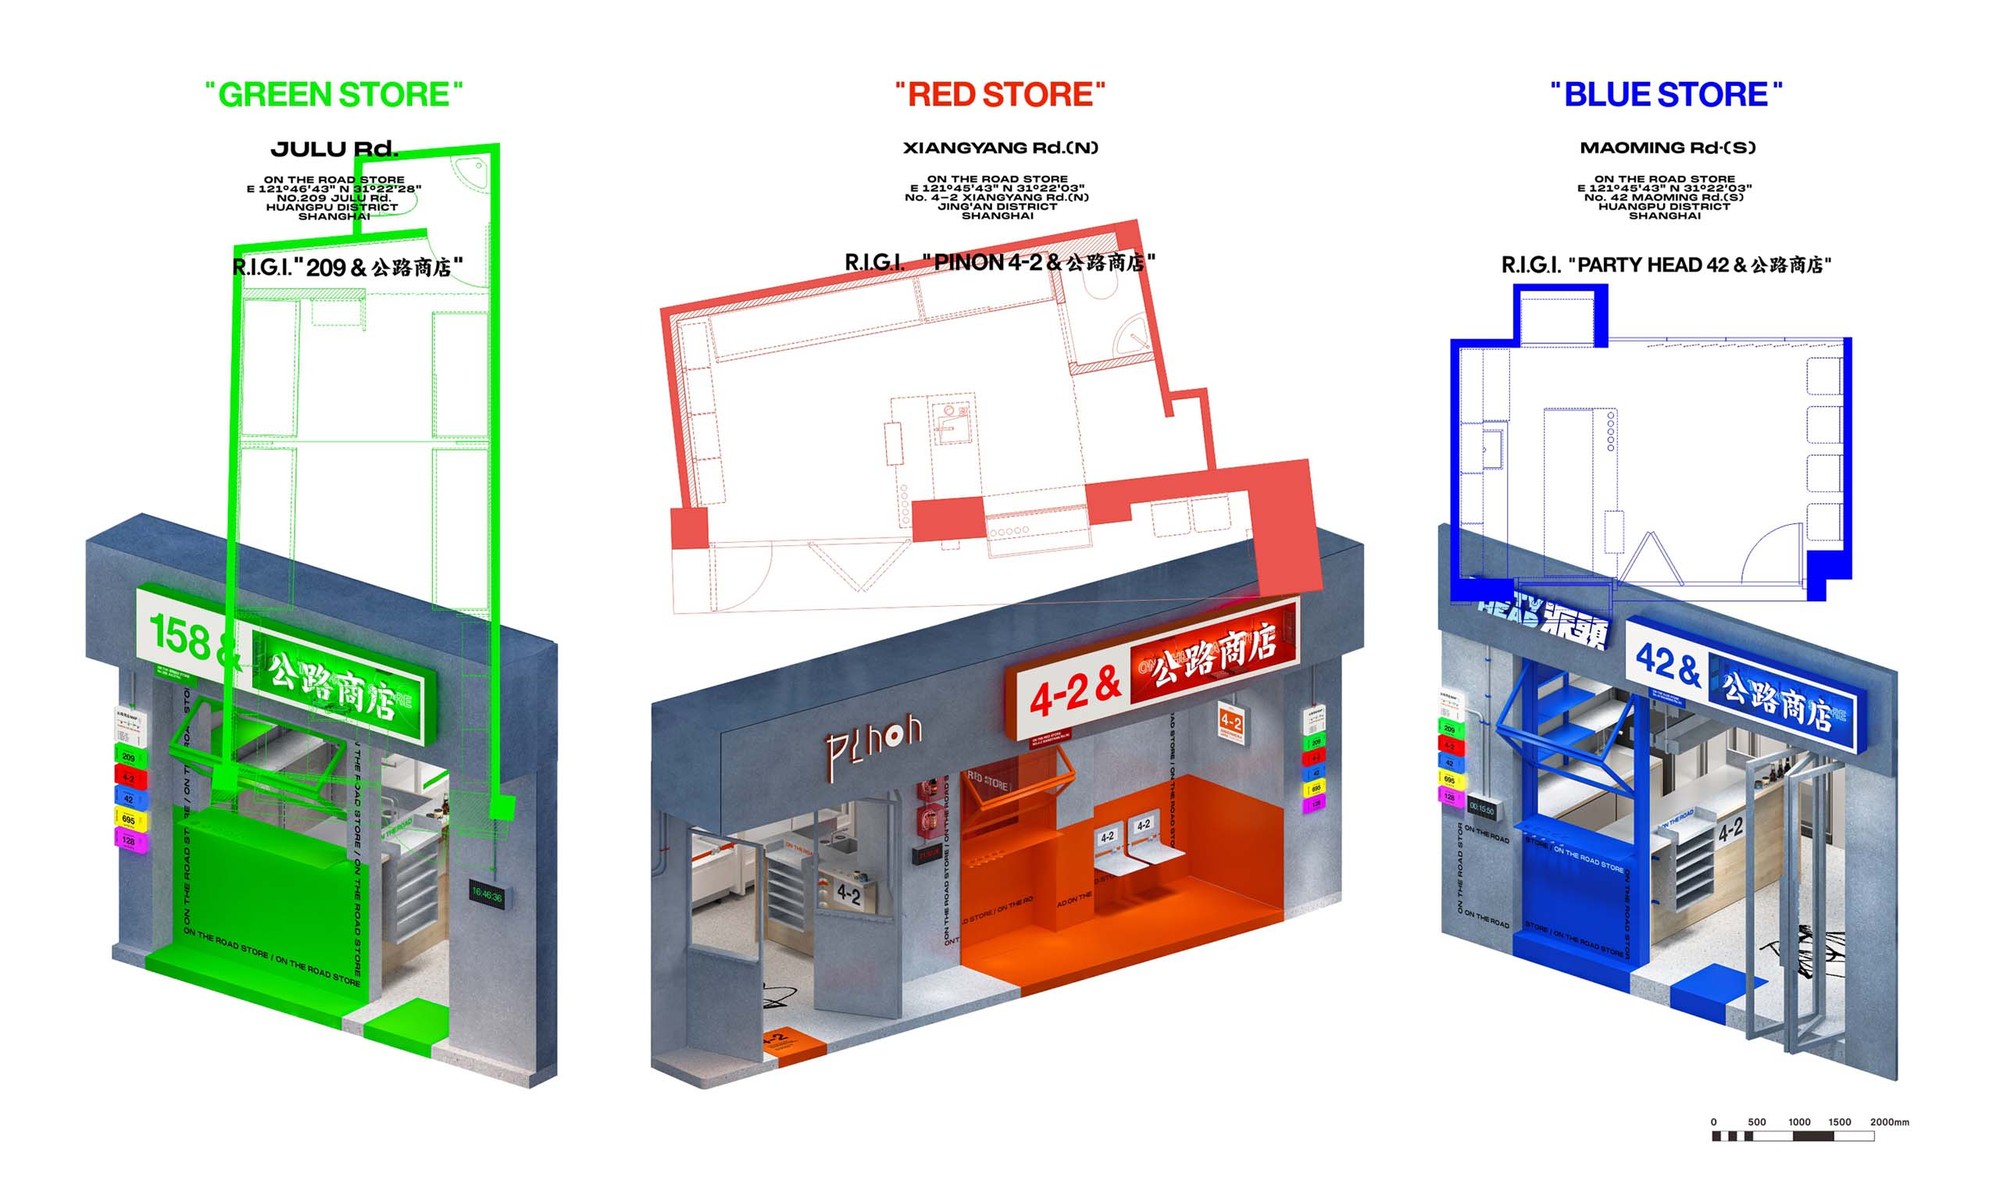 On The Road Store, “Three Stores, Three Colors, Three Locations”